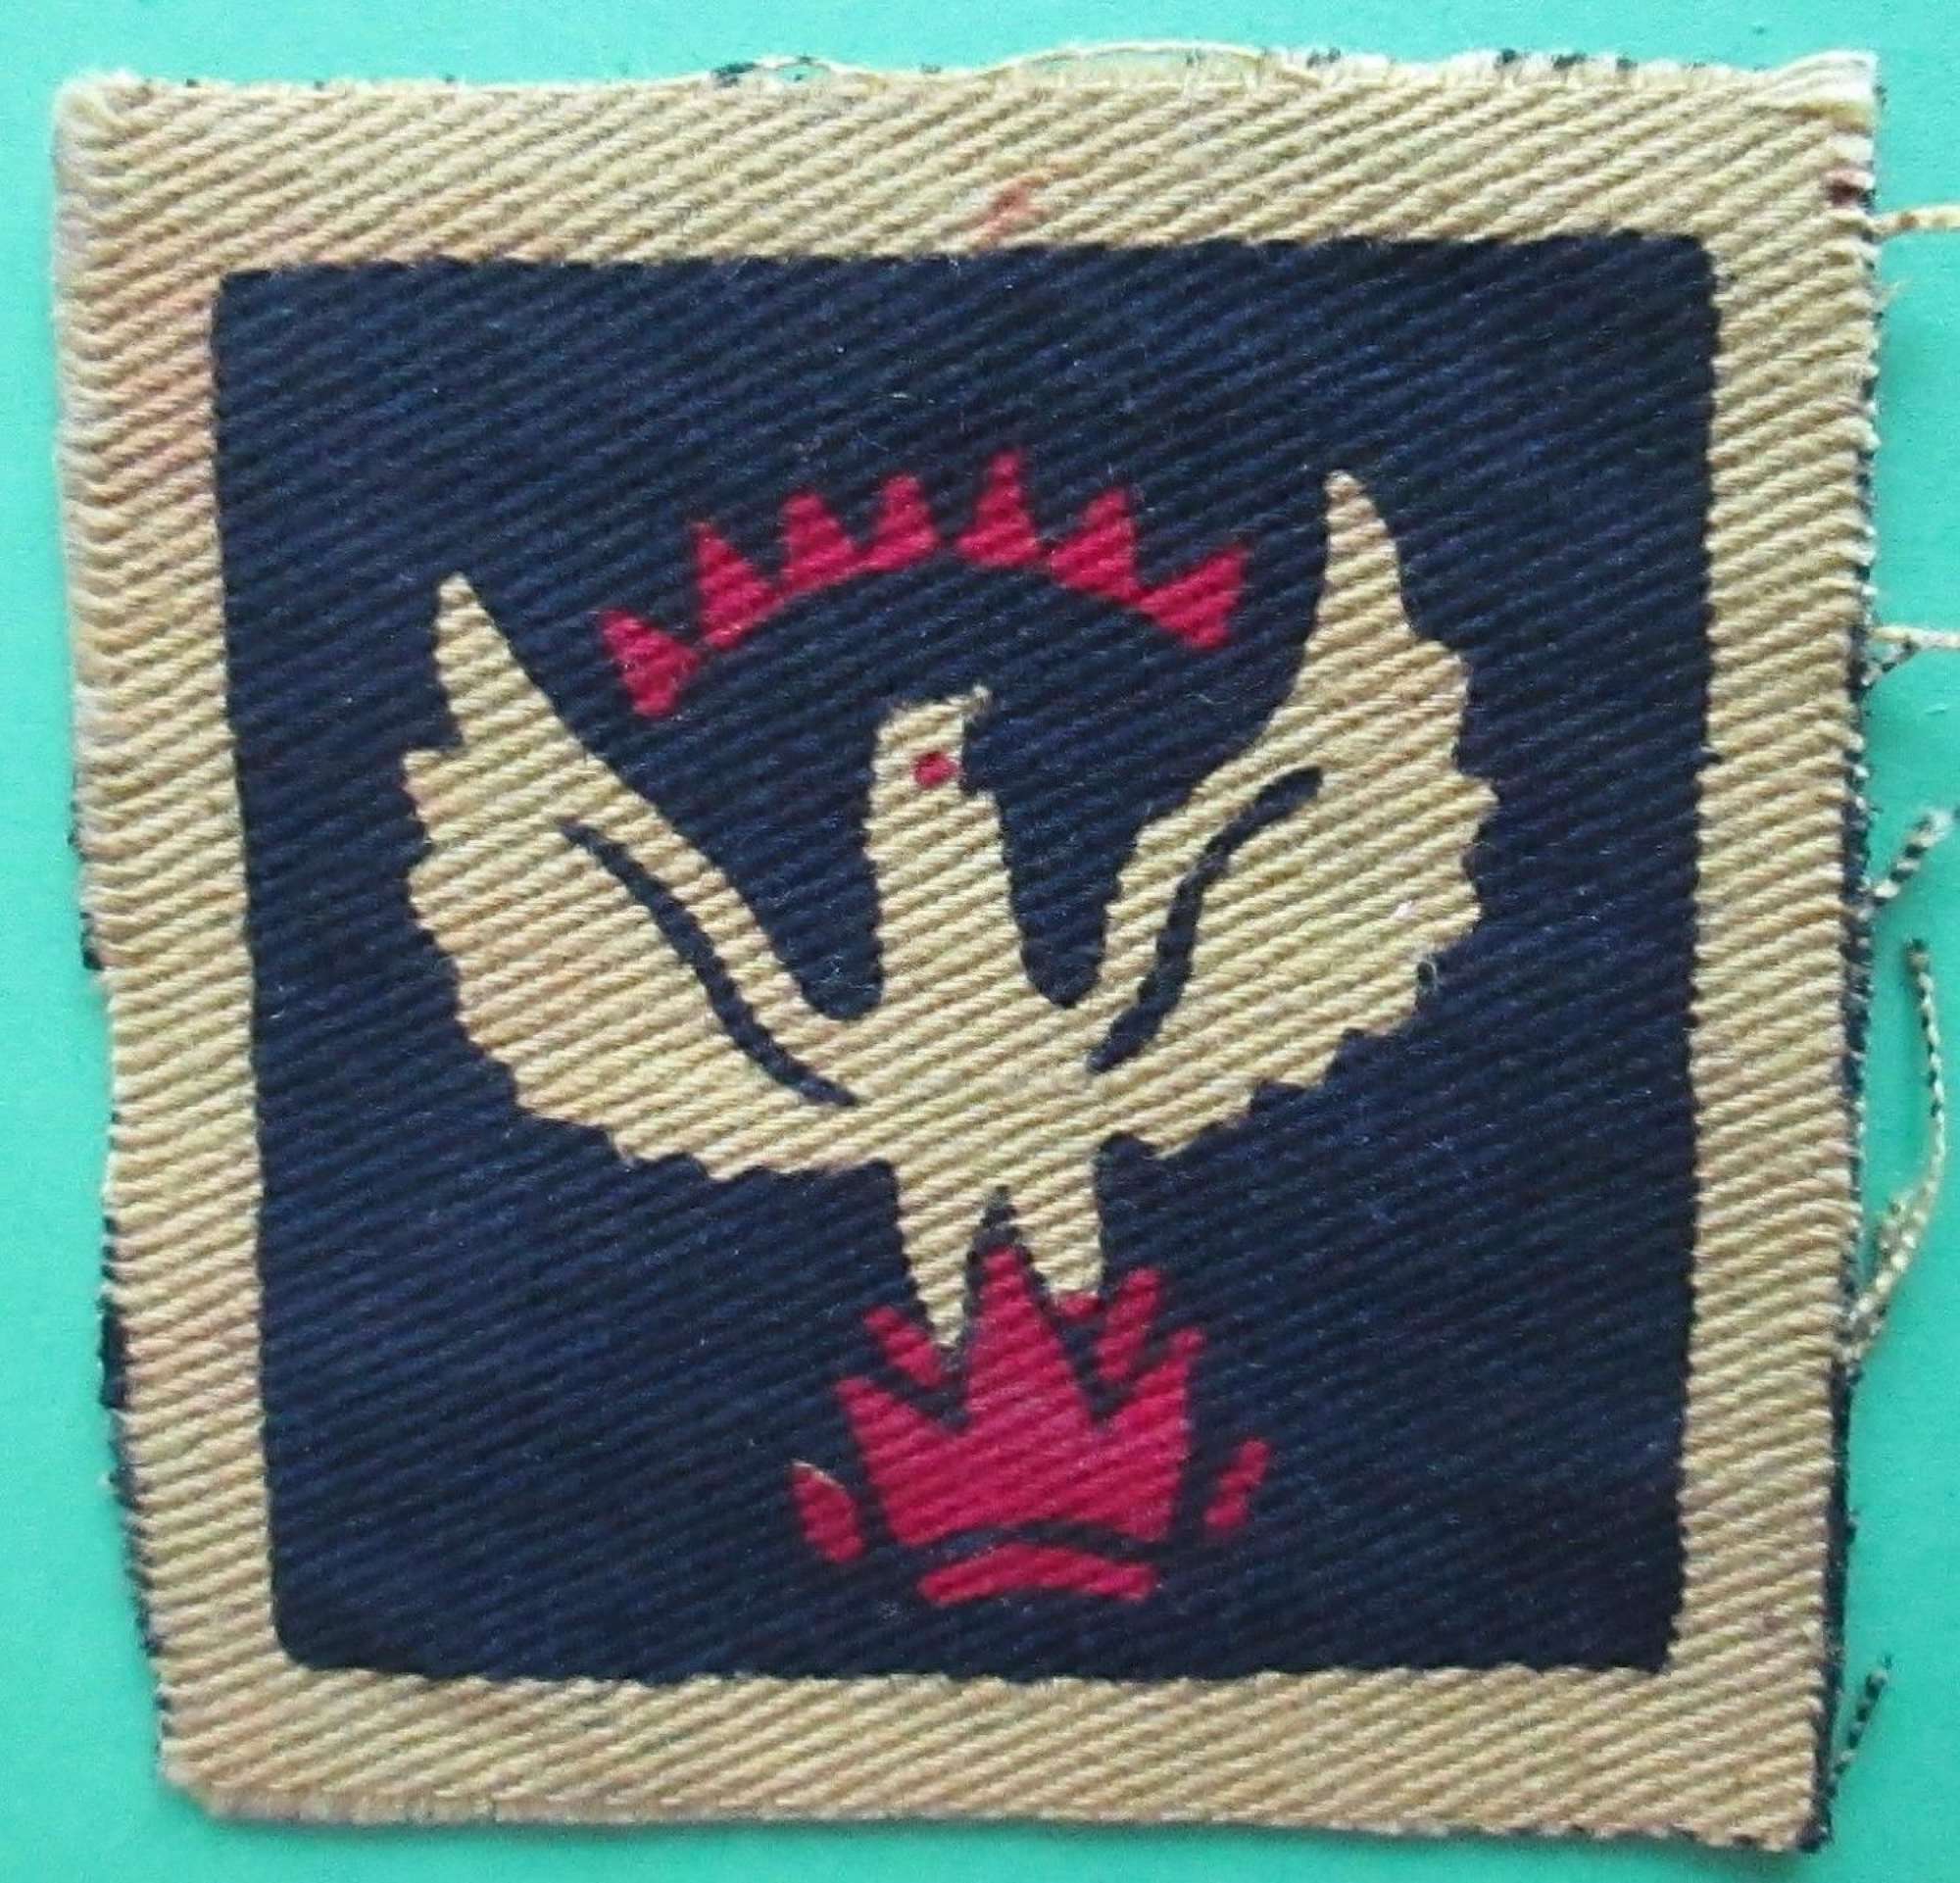 A 105th MADRAS LINE OF COMMUNICATIONS FORMATION PATCH